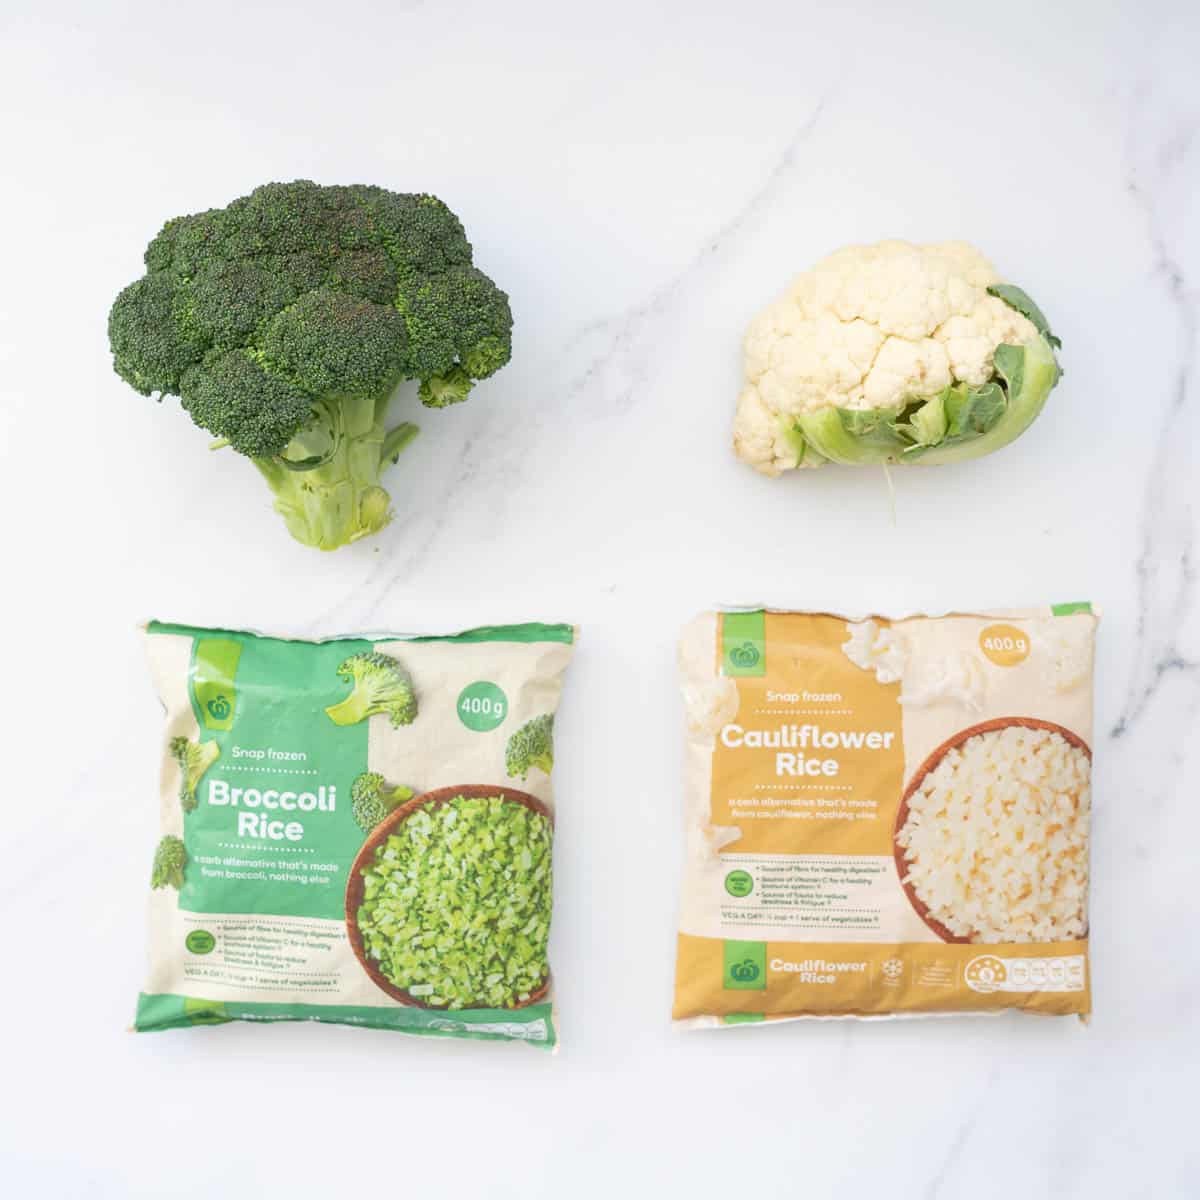 A head of broccoli next to a pack of frozen broccoli rice, a head of cauliflower next to a bag of frozen broccoli rice.